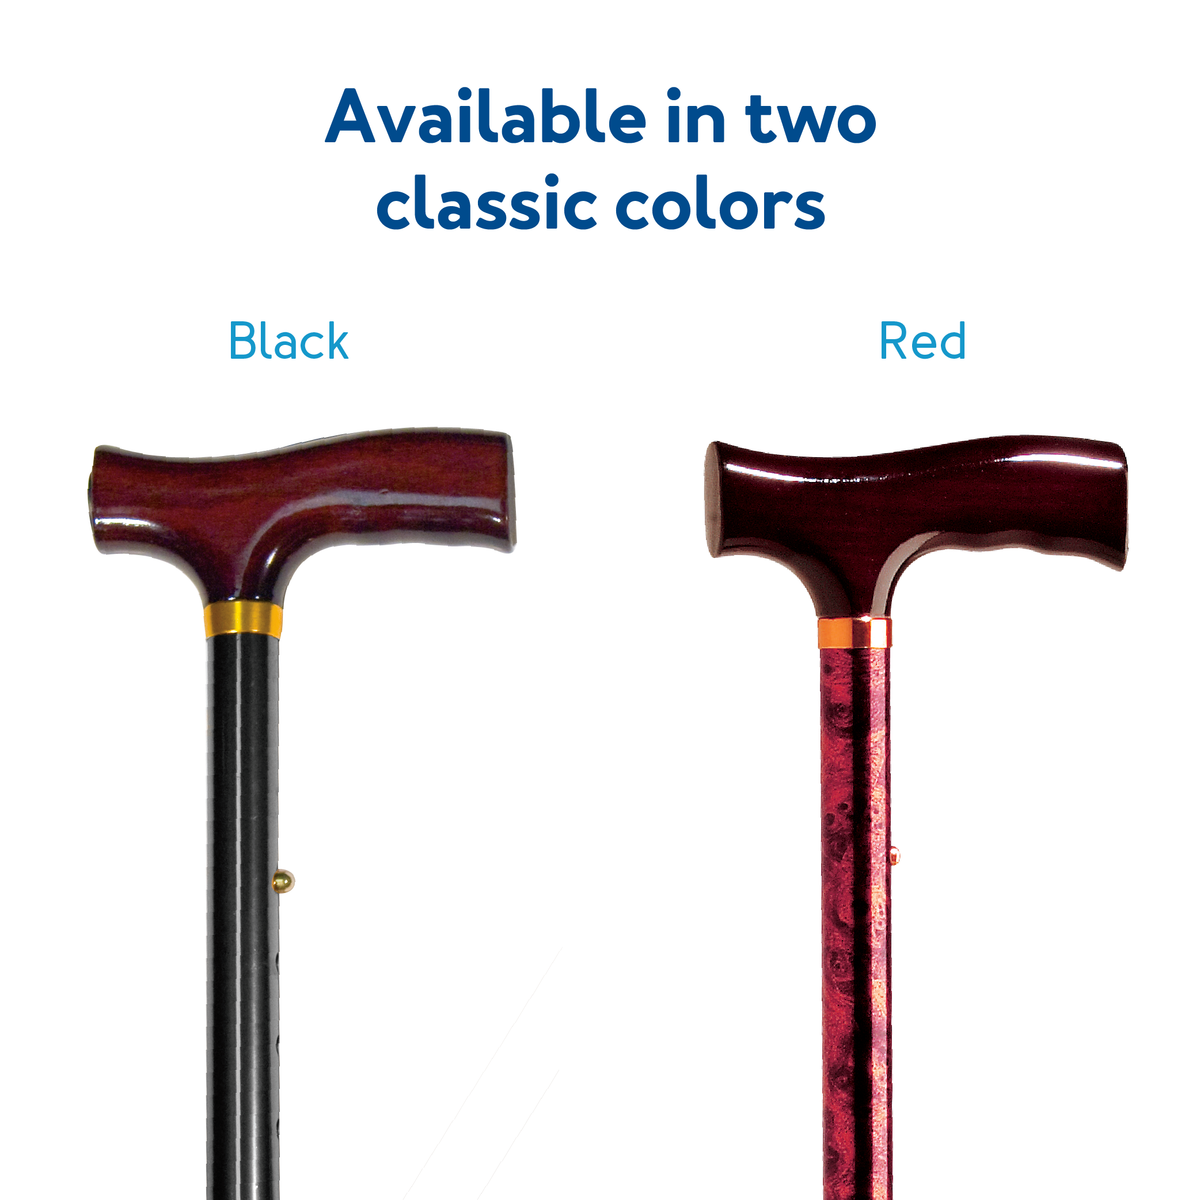 The Carex Designer Derby Cane’s available in two classic colors: black and red.